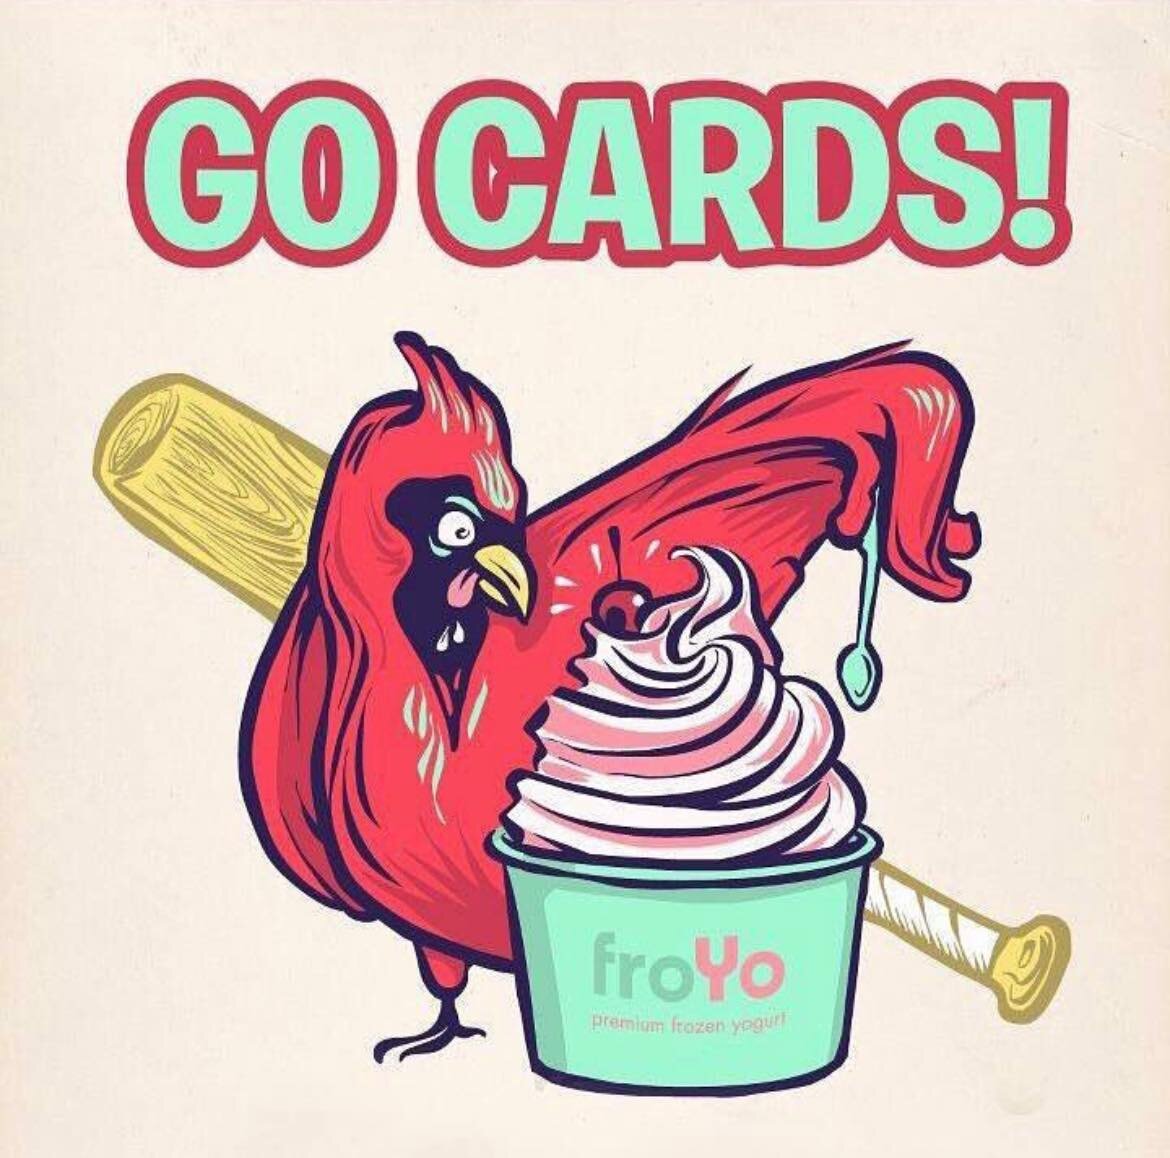 ⚾️🍦 Score 15% Off on Home Opener Day!🍦⚾️ 

Today's the day, Cardinals fans! Show your team spirit by wearing your Cards gear and enjoy 15% off your froyo. Let&rsquo;s celebrate the home opener together with a sweet win! 🎉

#GoCardinals #FroyoForFa